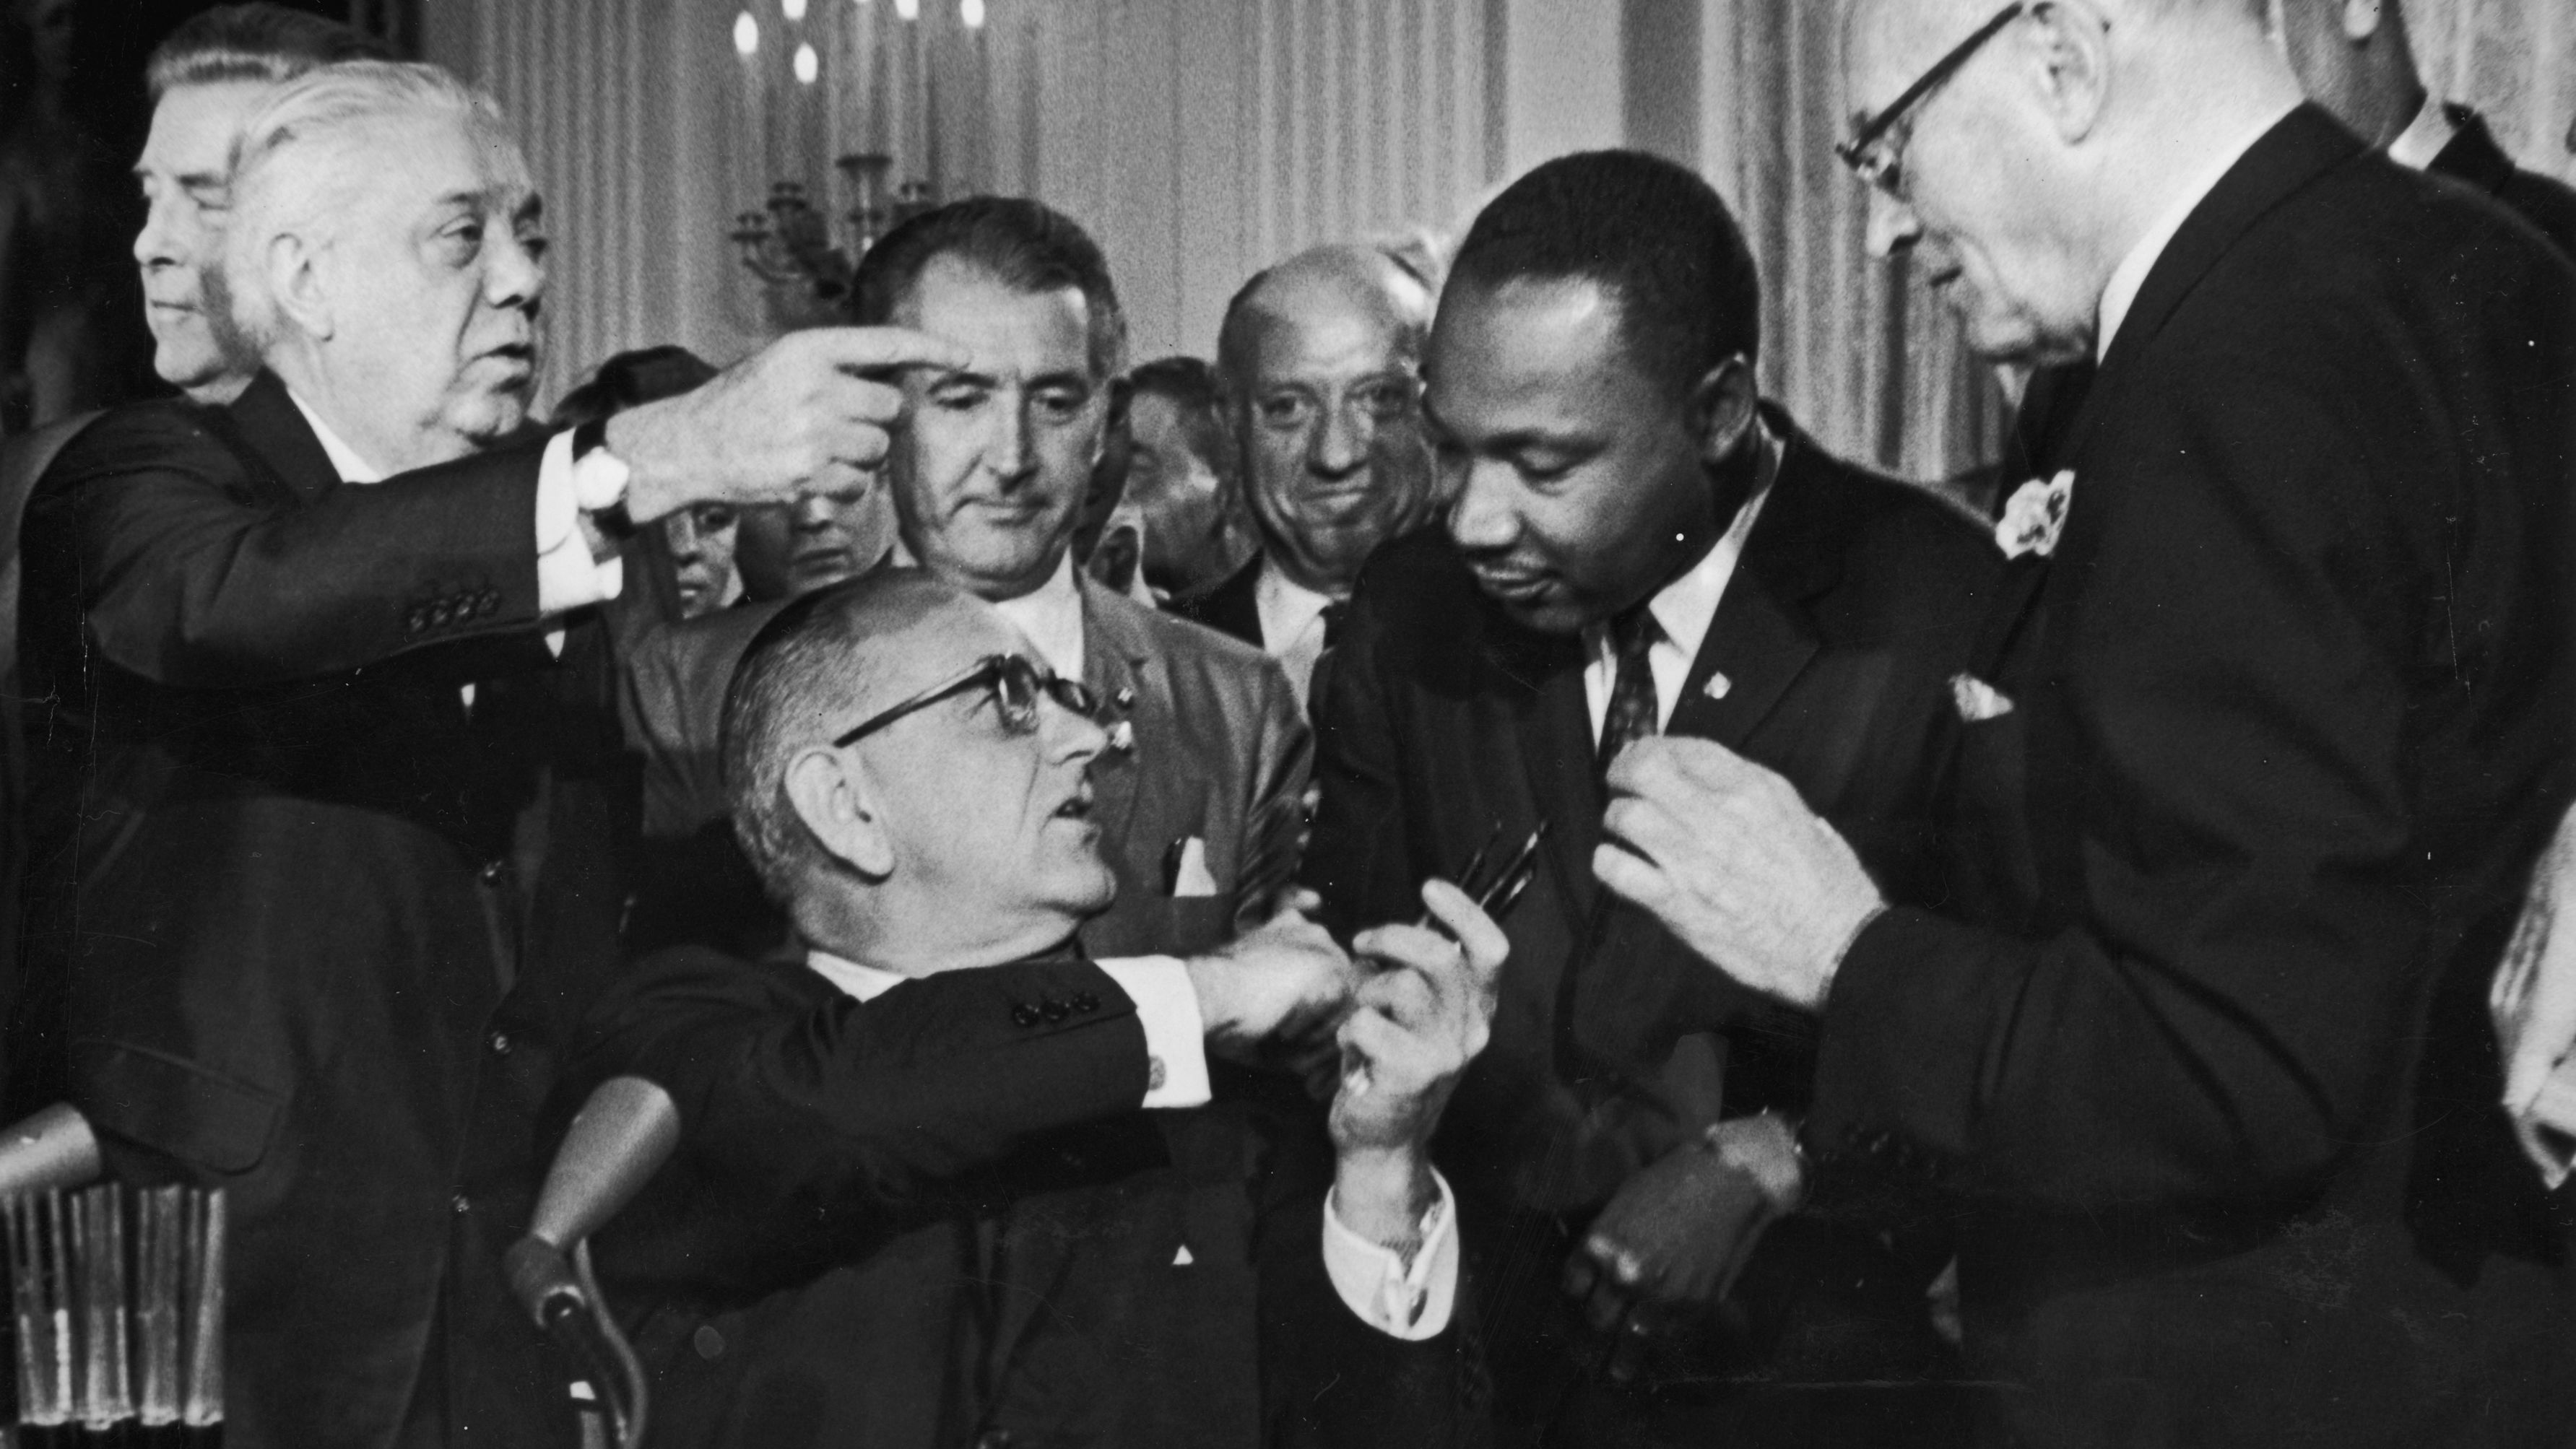  President Lyndon Johnson greets the Rev. Martin Luther King Jr. at the signing of the 1964 Civil Rights Act. 